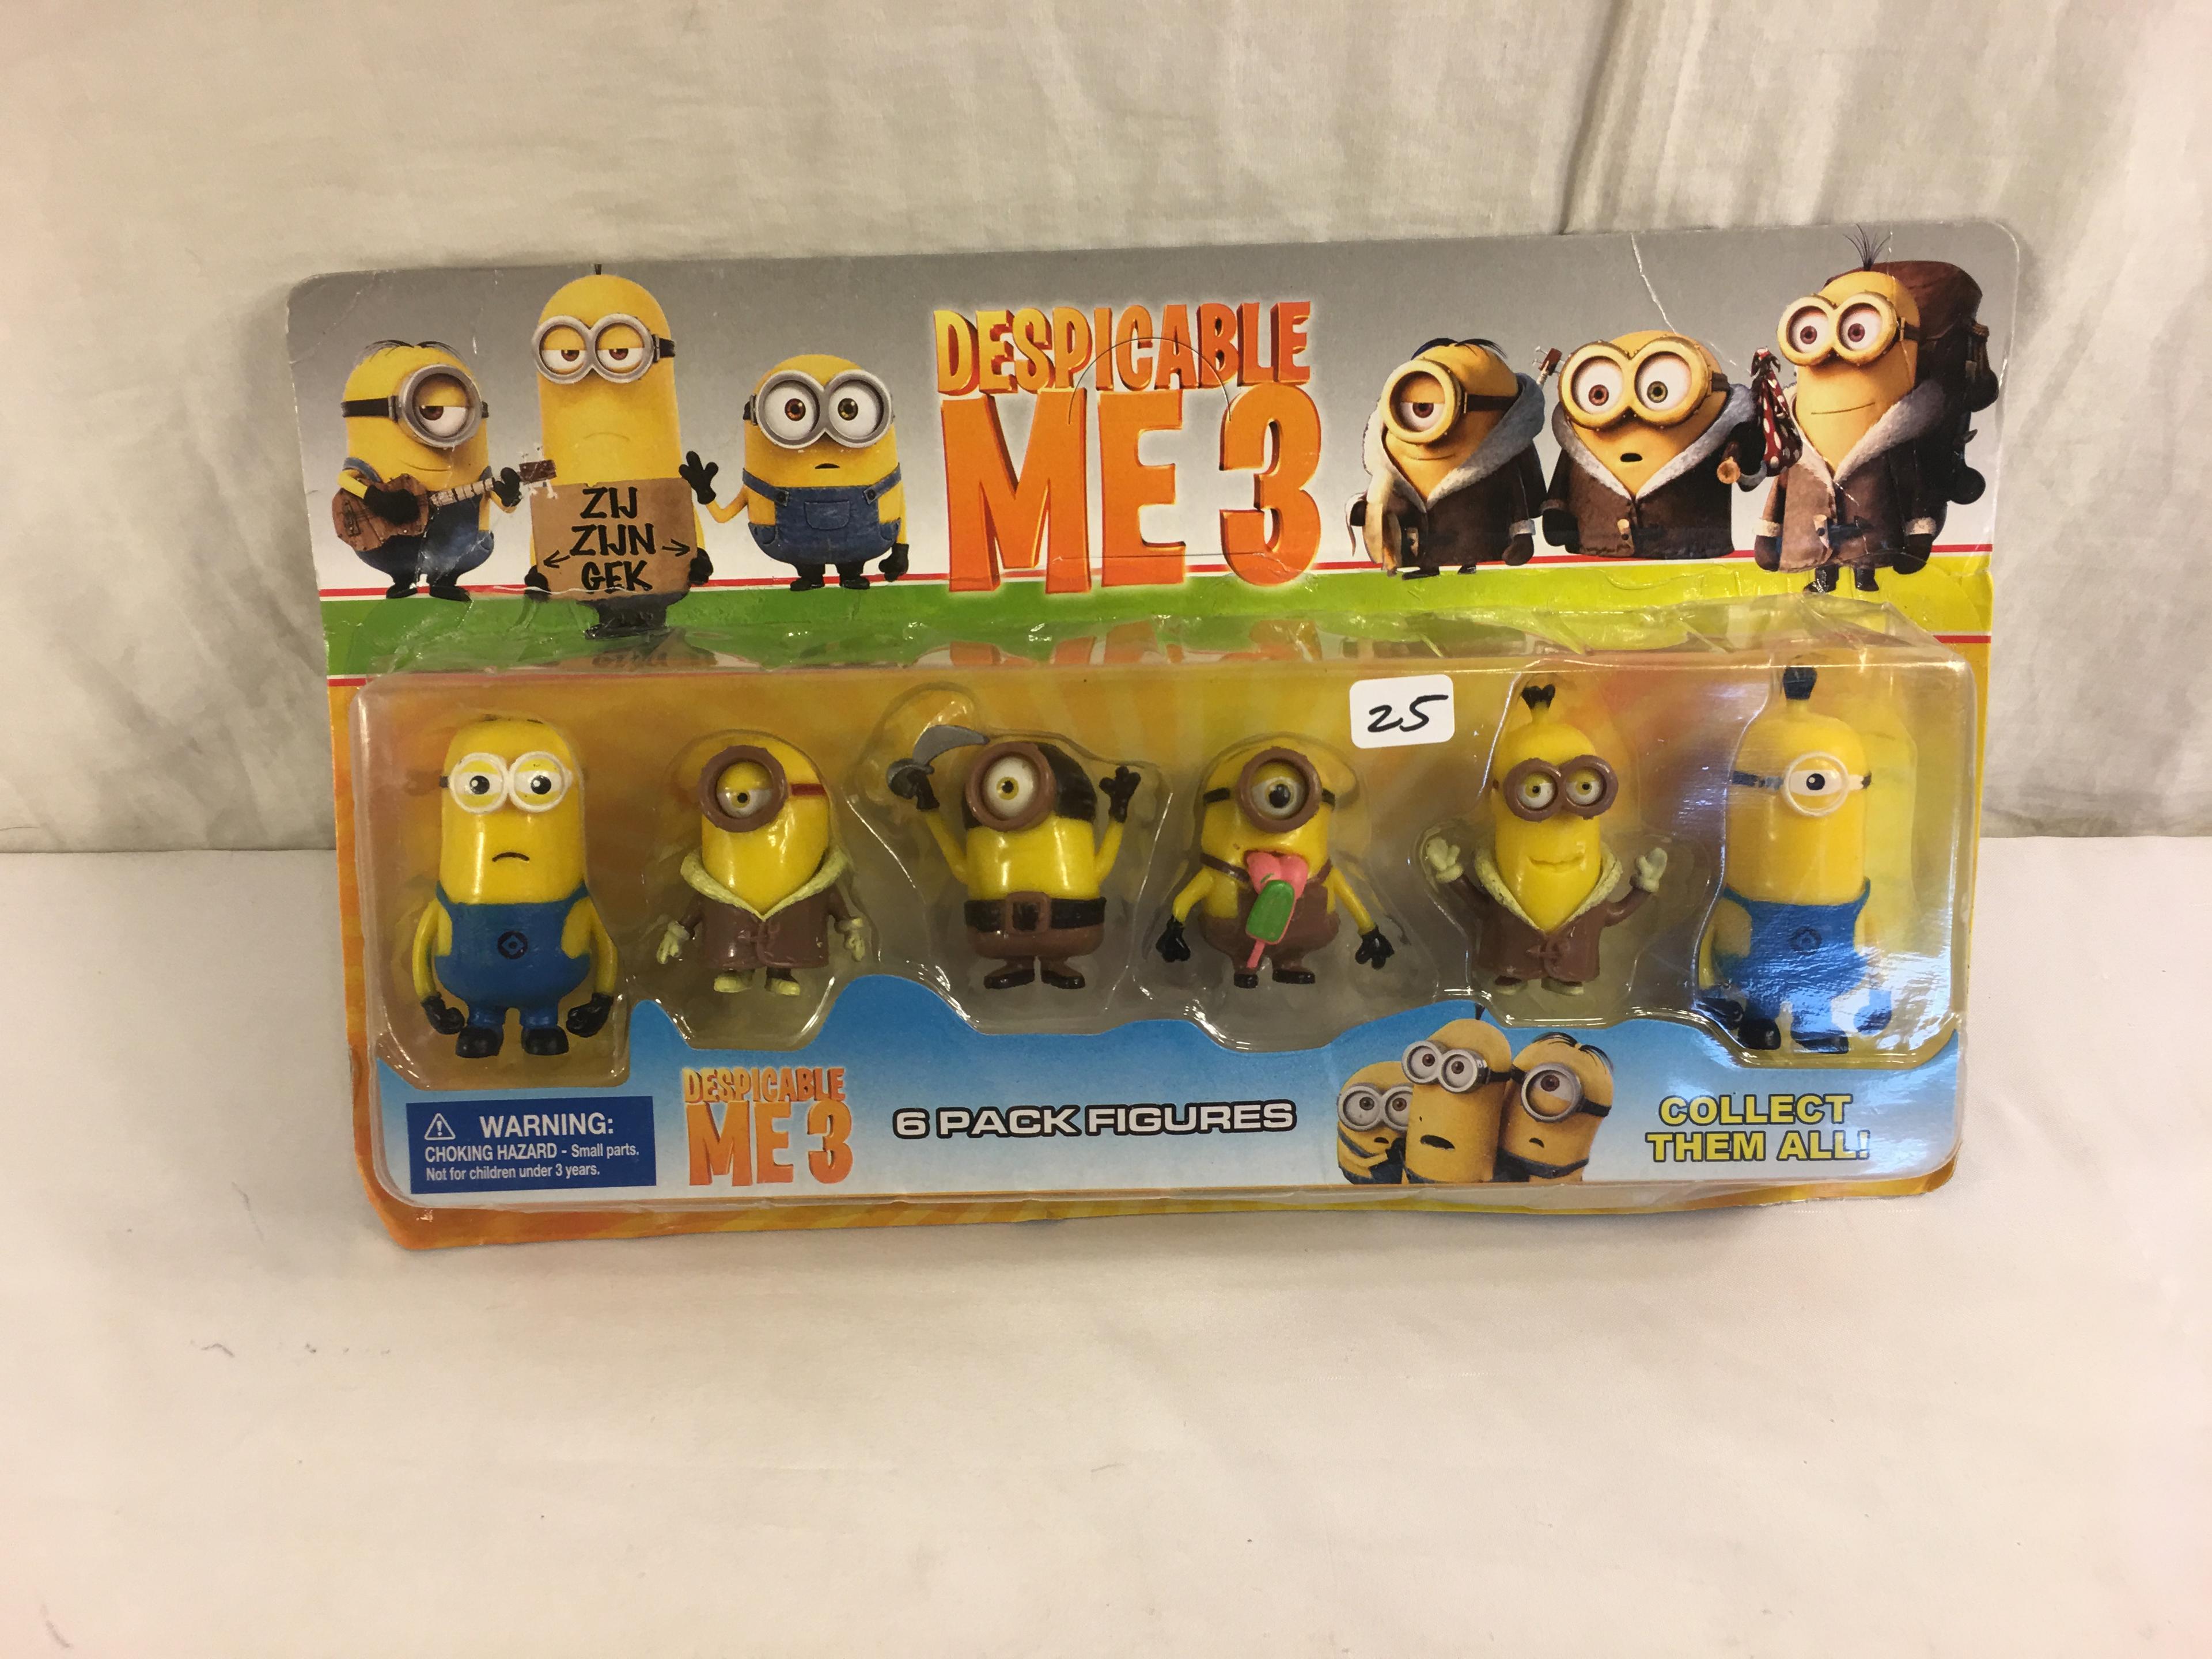 NIP Collector Despicable Me 3 Minion Mini  6 Pack Figures Size: 3-4"Tall/each